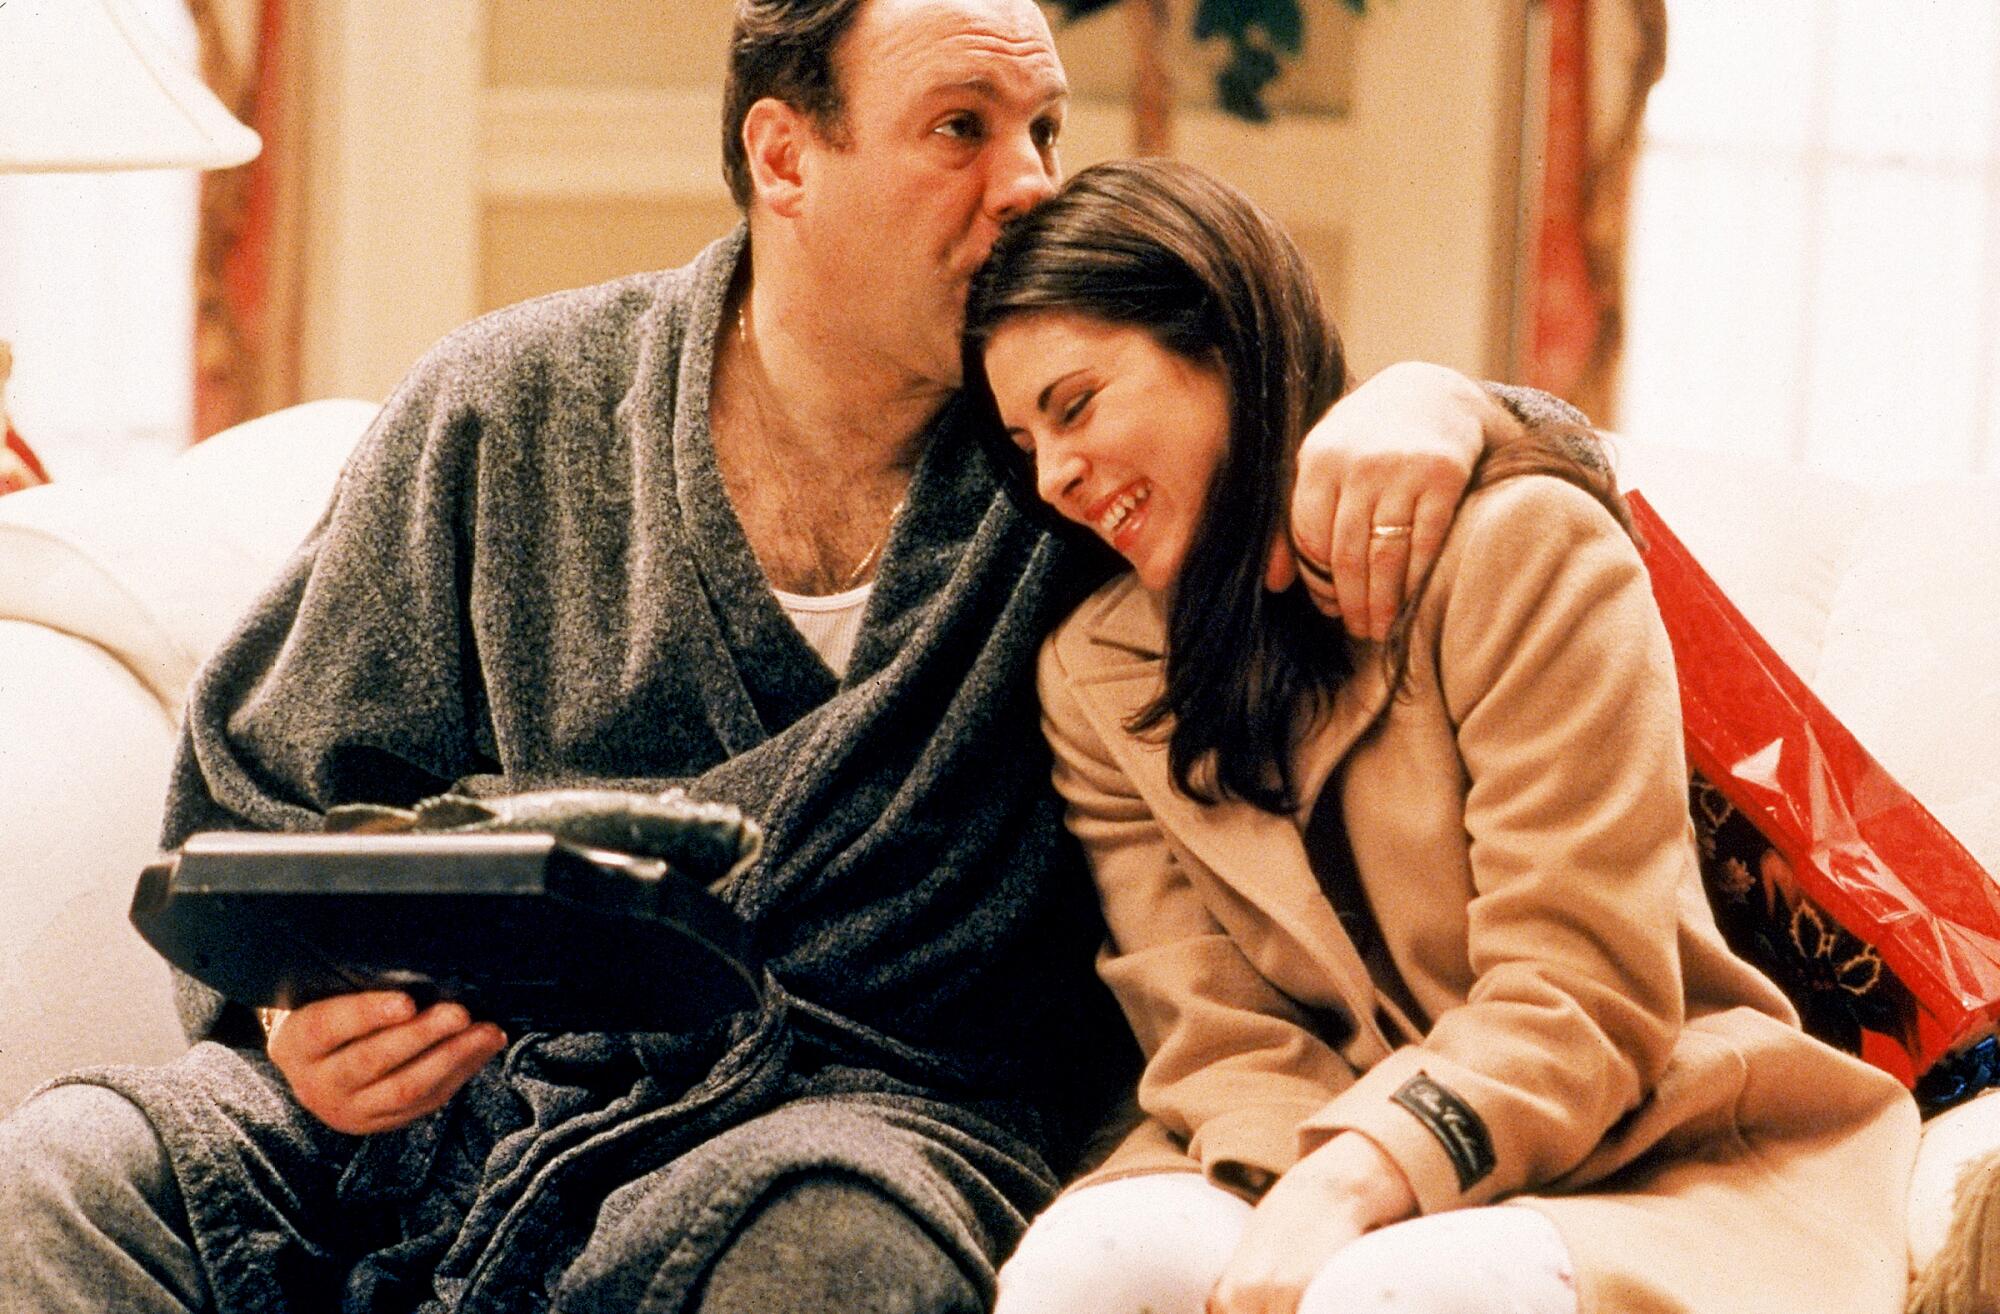 A man in a bathrobe holds a gift from his daughter and kisses her on the head. They are seated side by side on a couch.